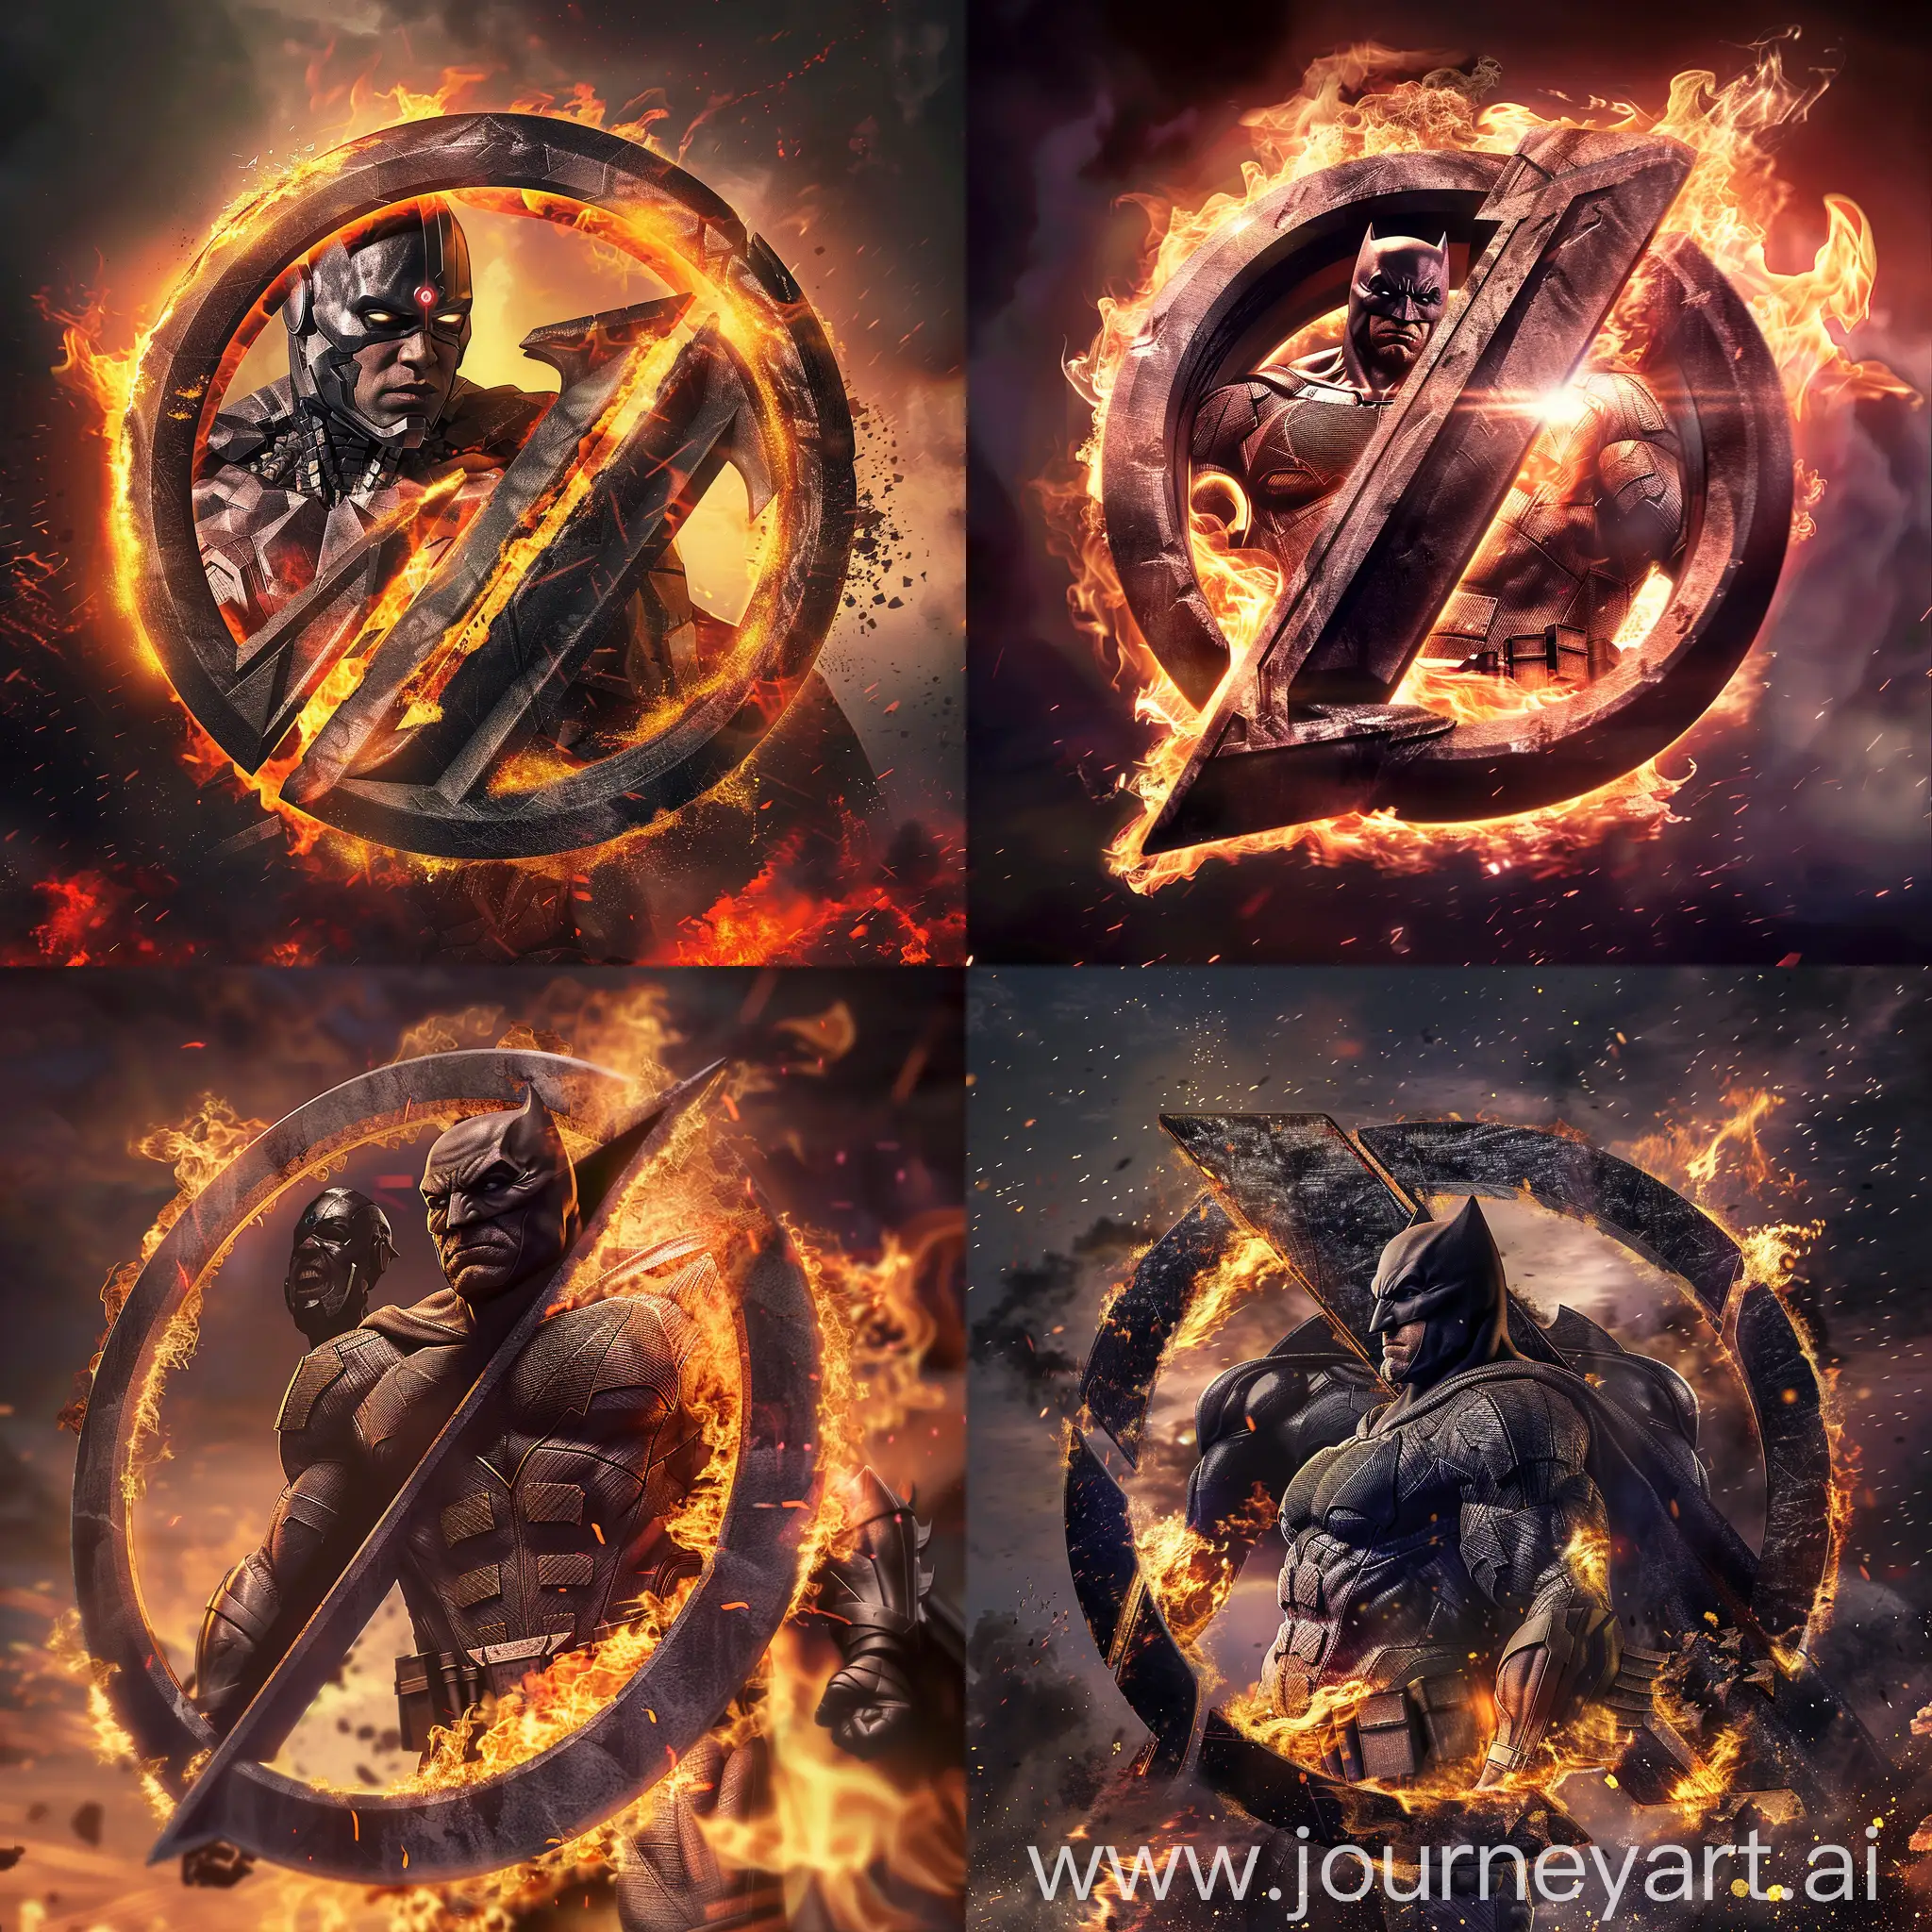 Burning-Ultra-Realistic-Justice-League-Logo-with-Darkseid-Image-in-8K